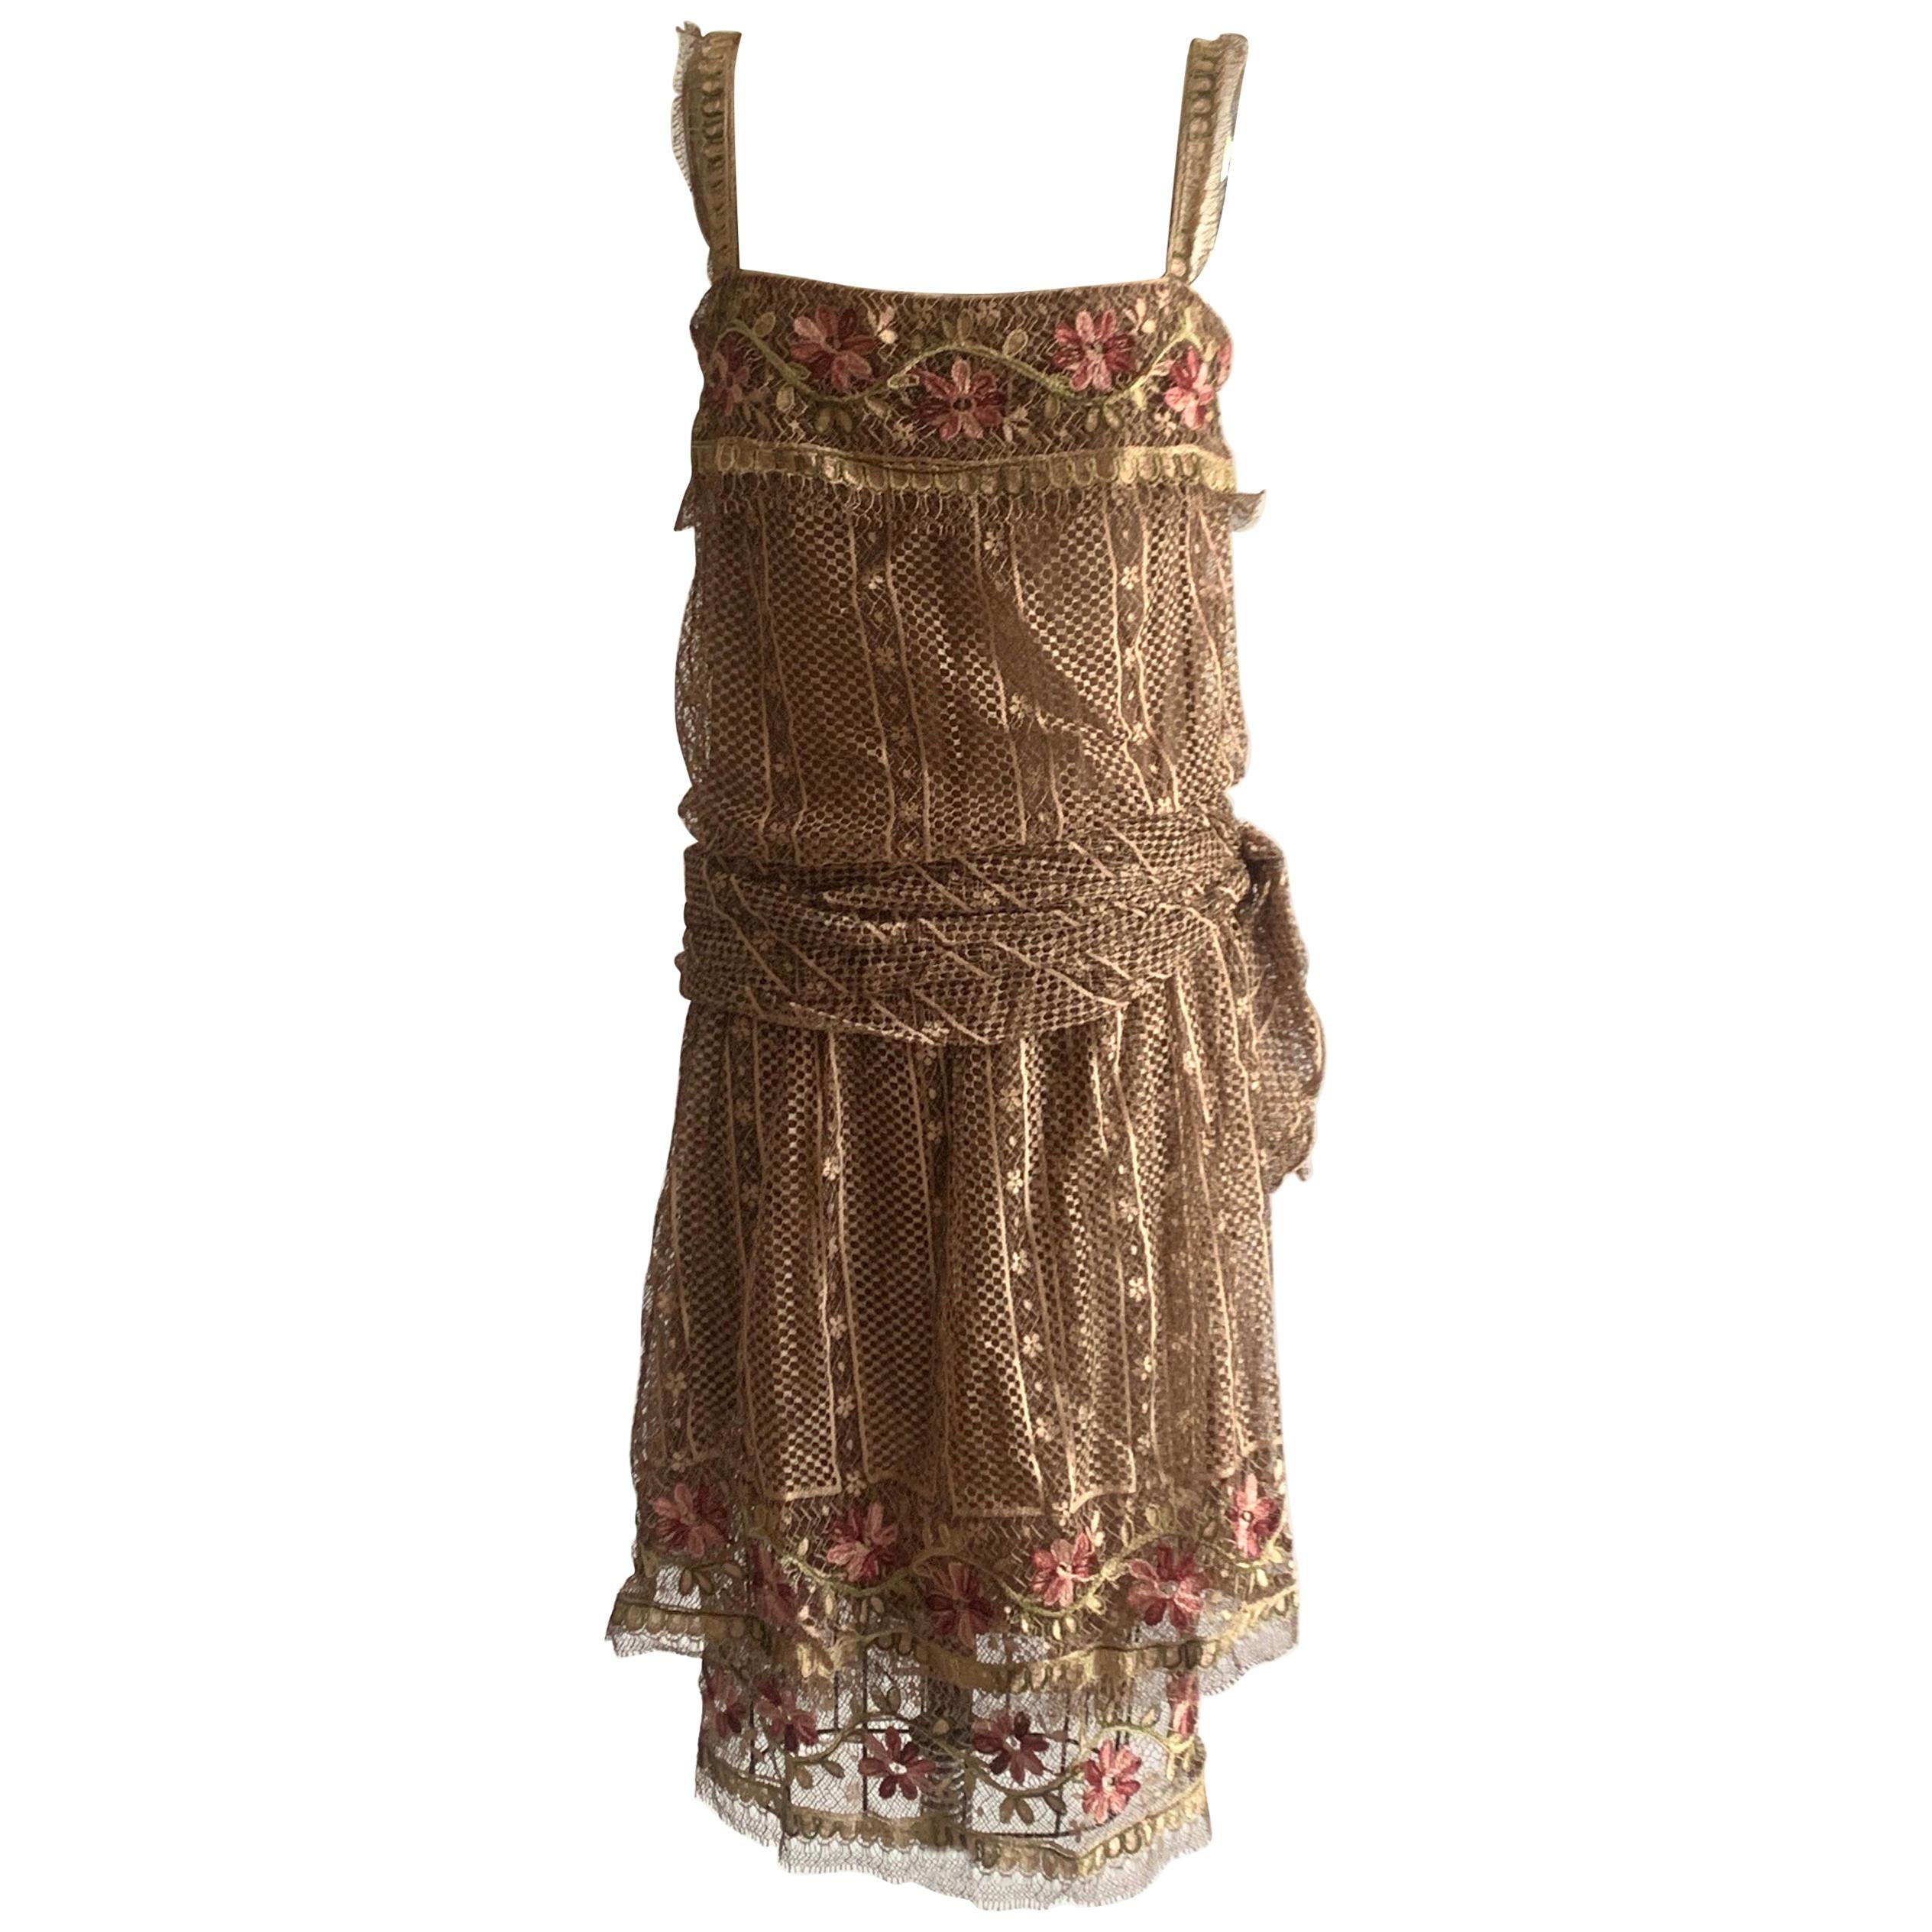 1970s Louis Feraud Couture Tan Lace Floral Embroidered Dress 